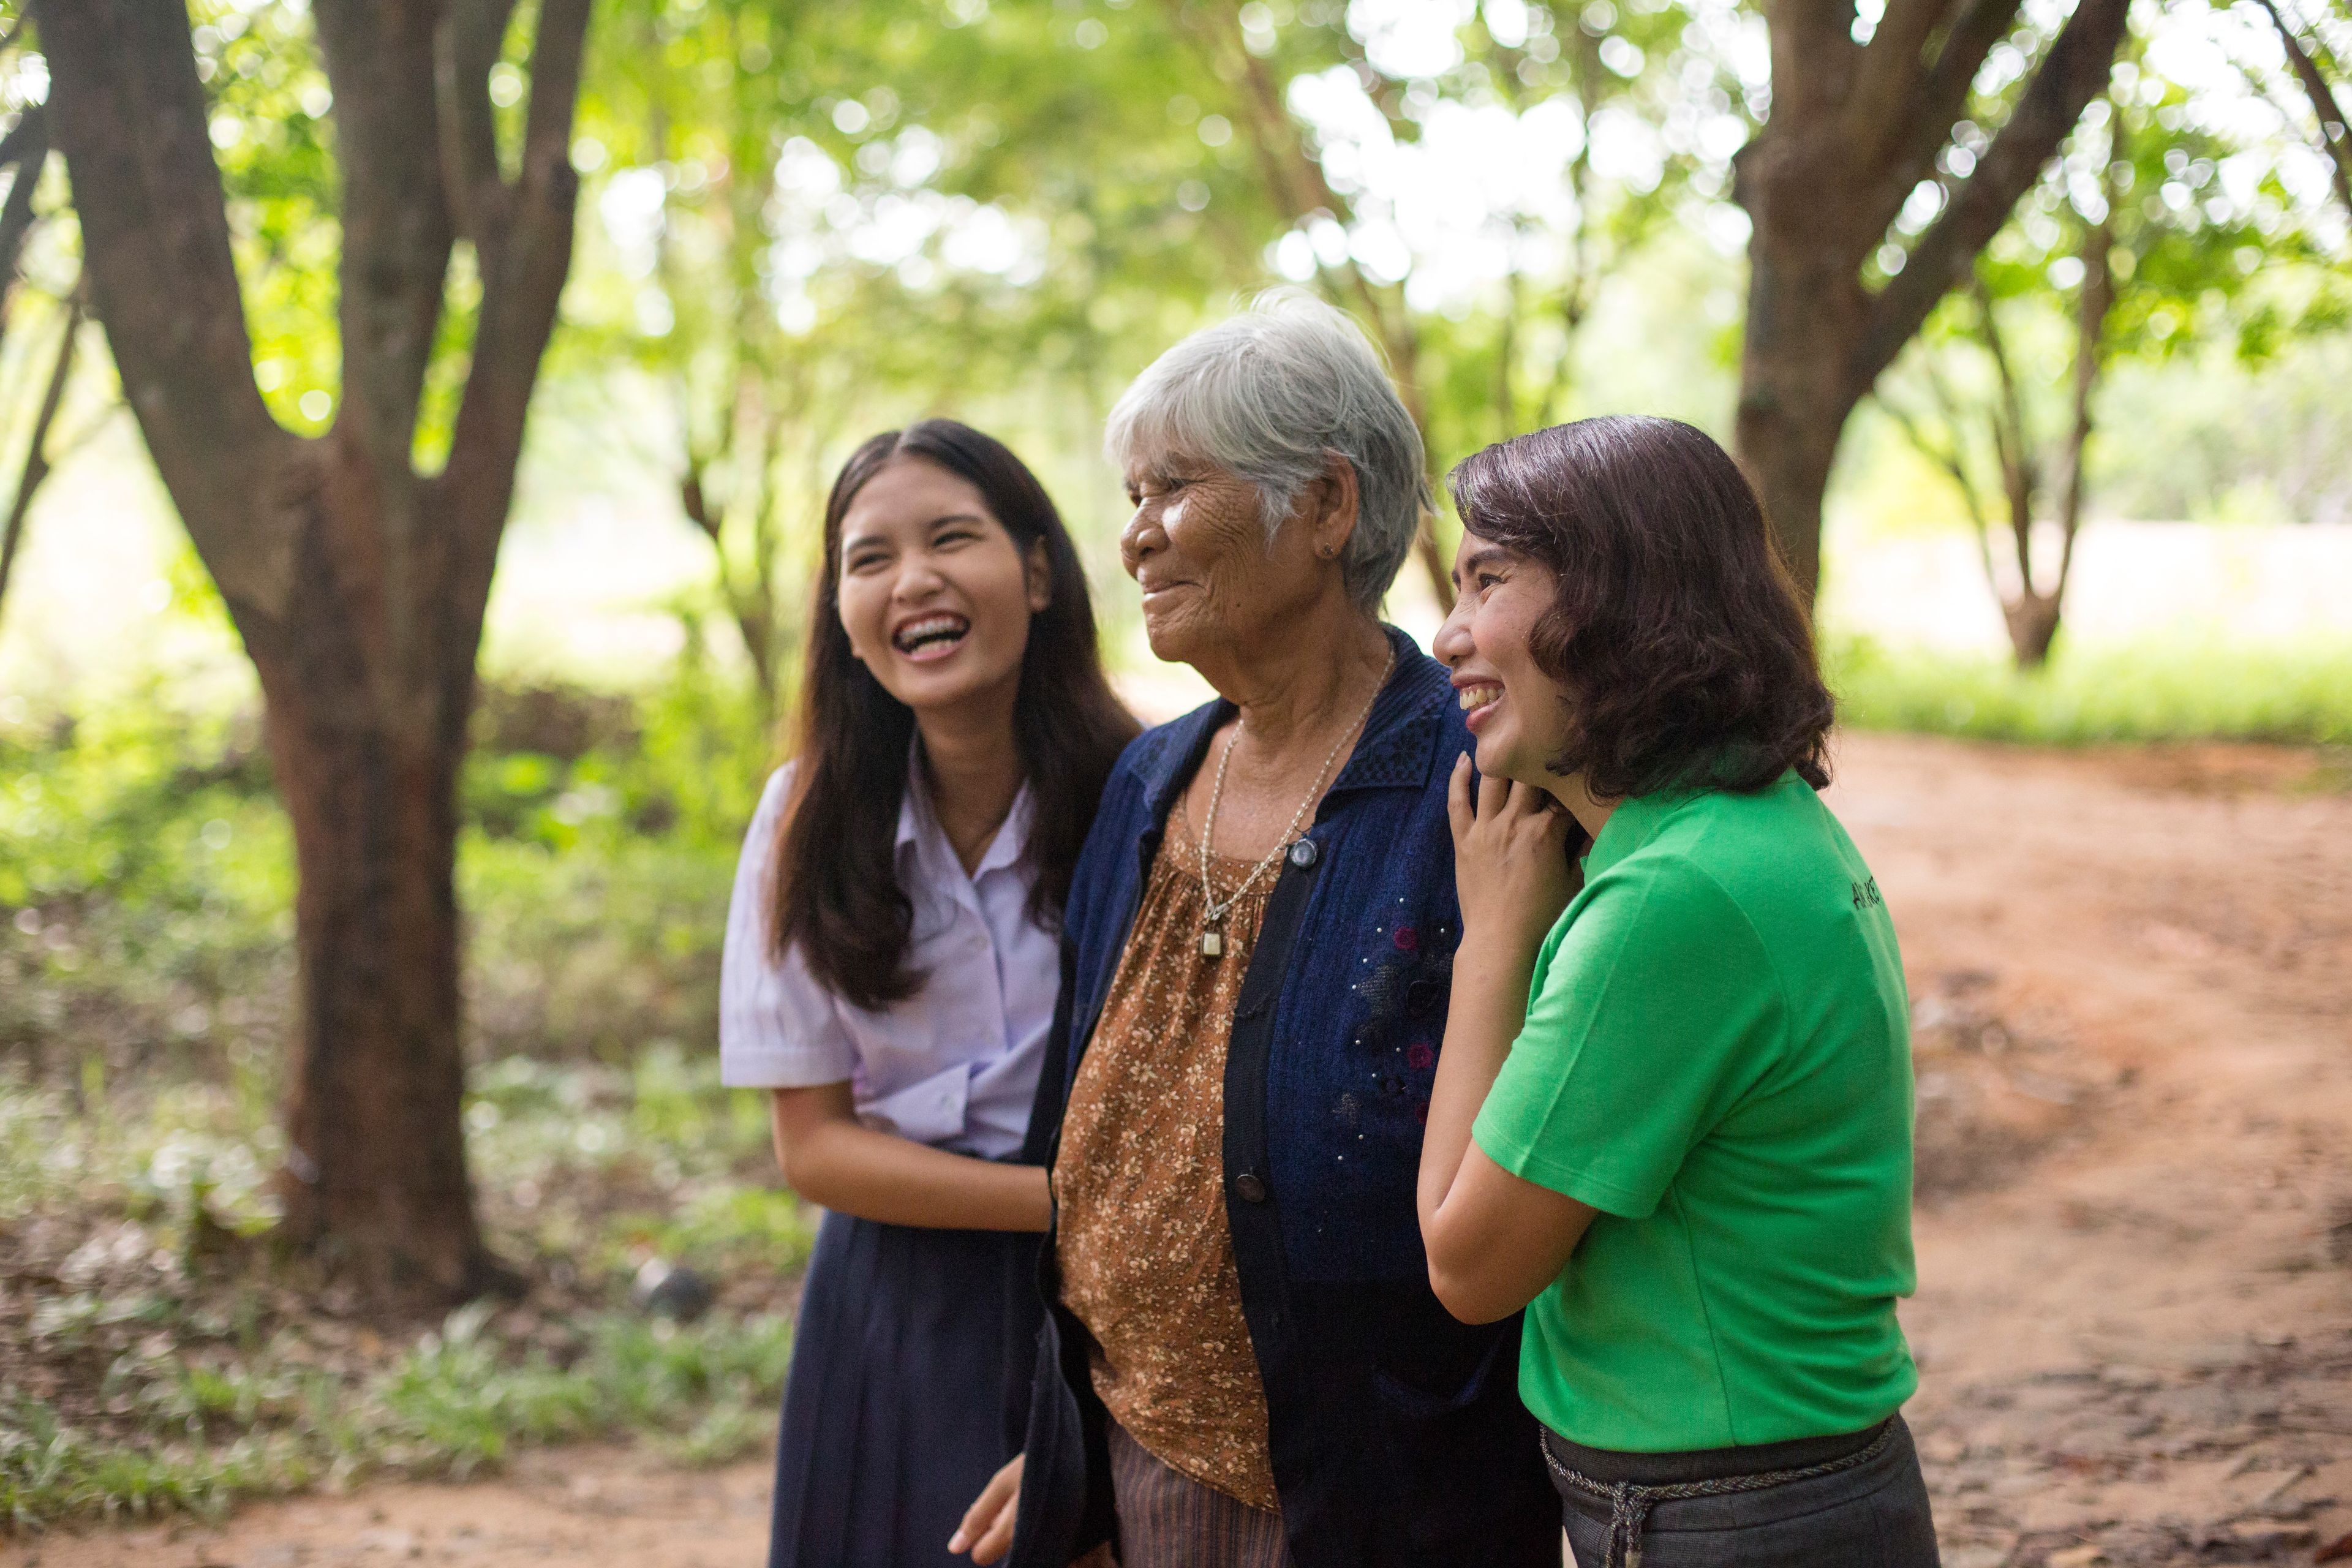 Two young women walk on a path through trees with an elderly woman.